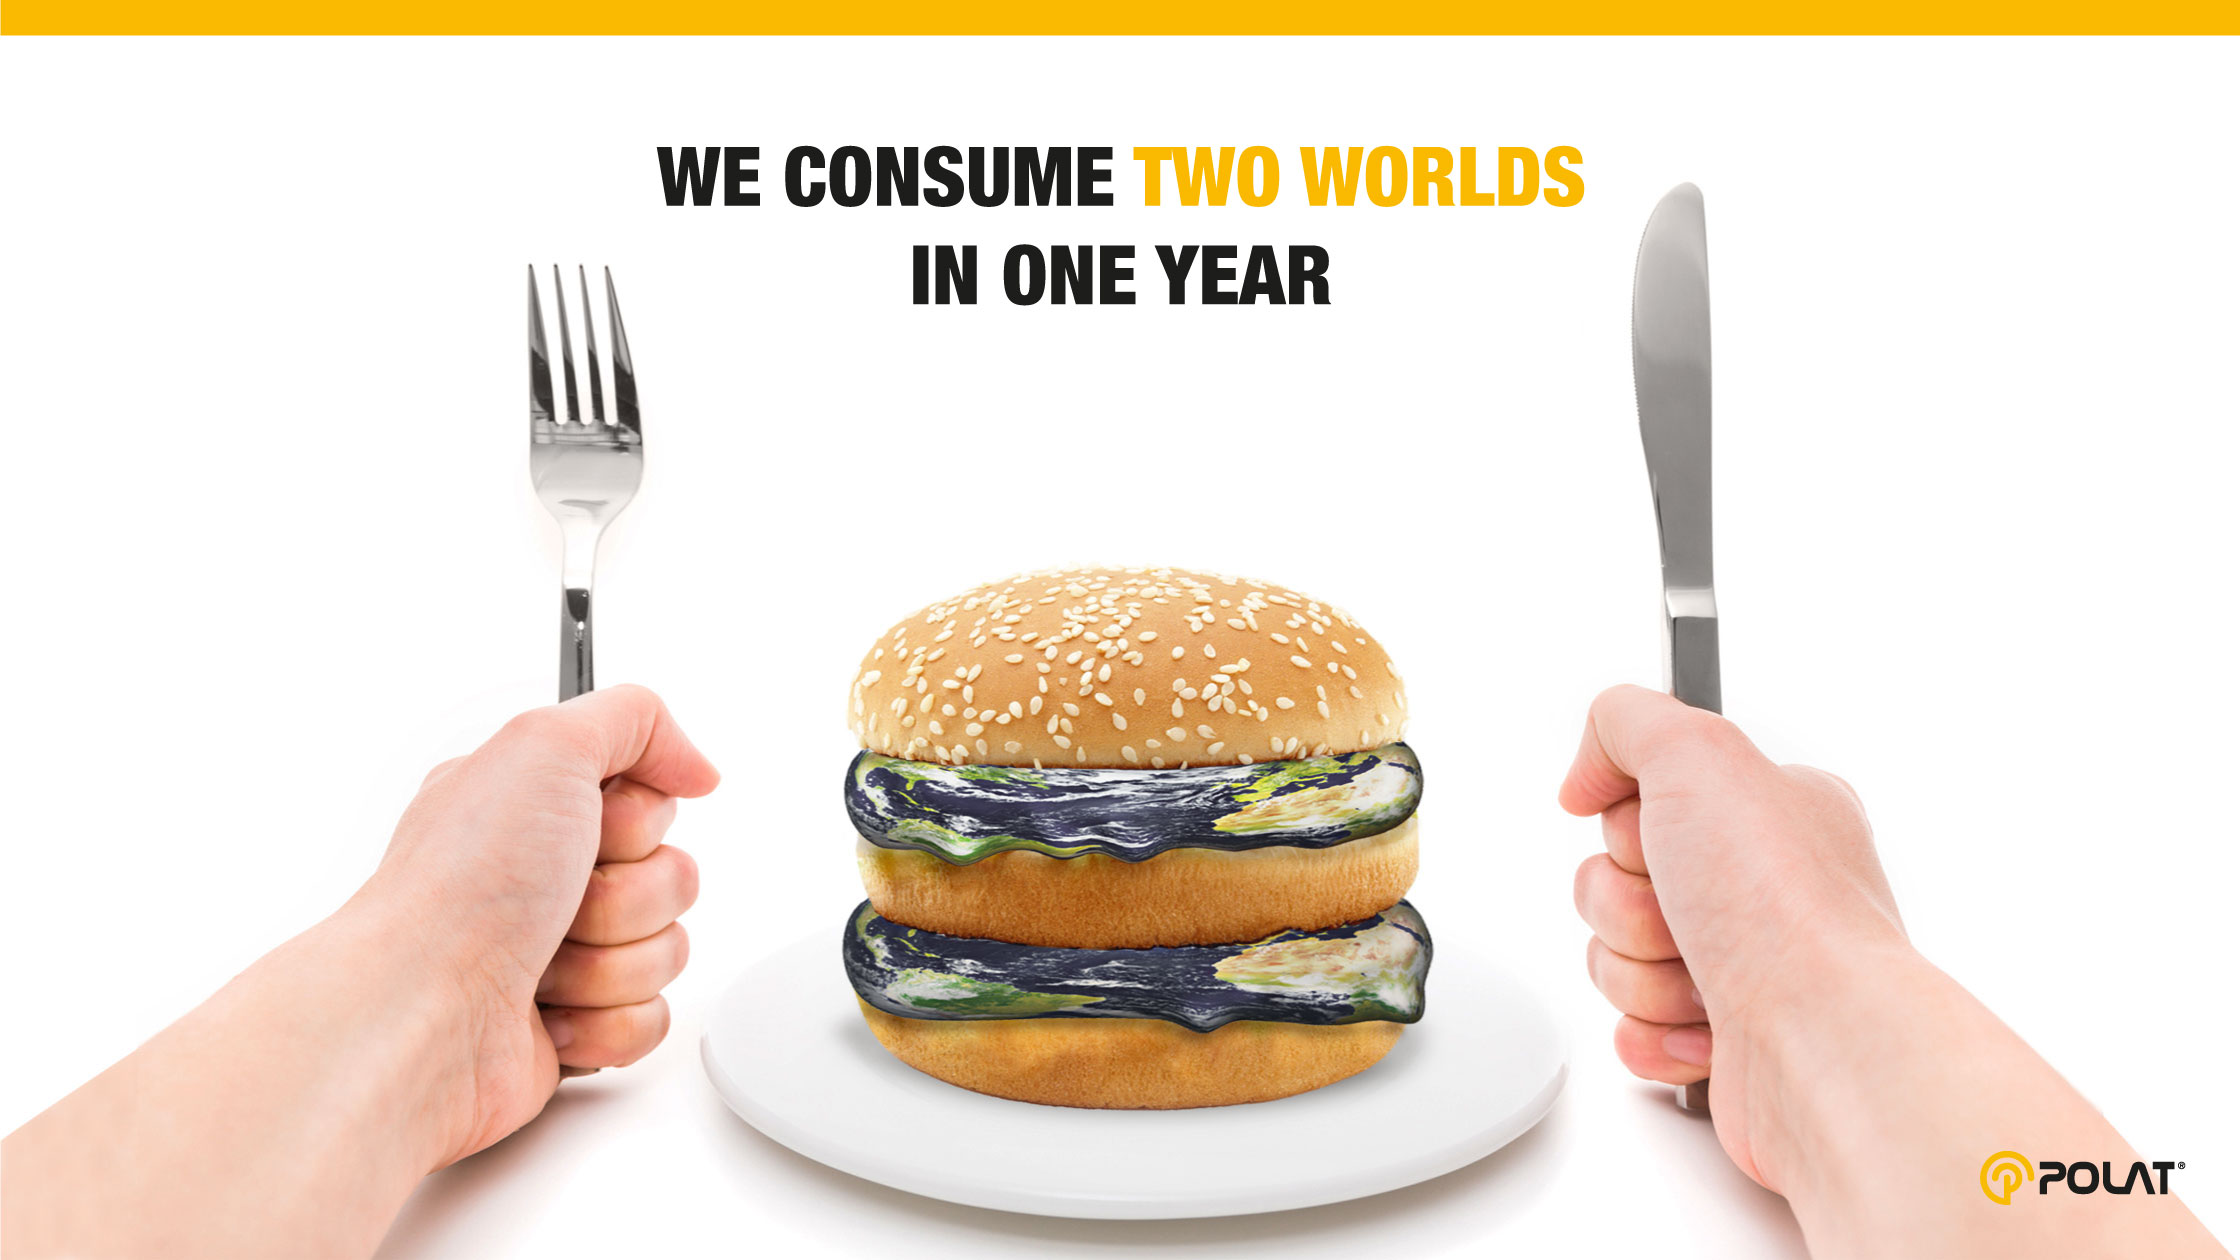 We Consume Almost Two Worlds in One Year